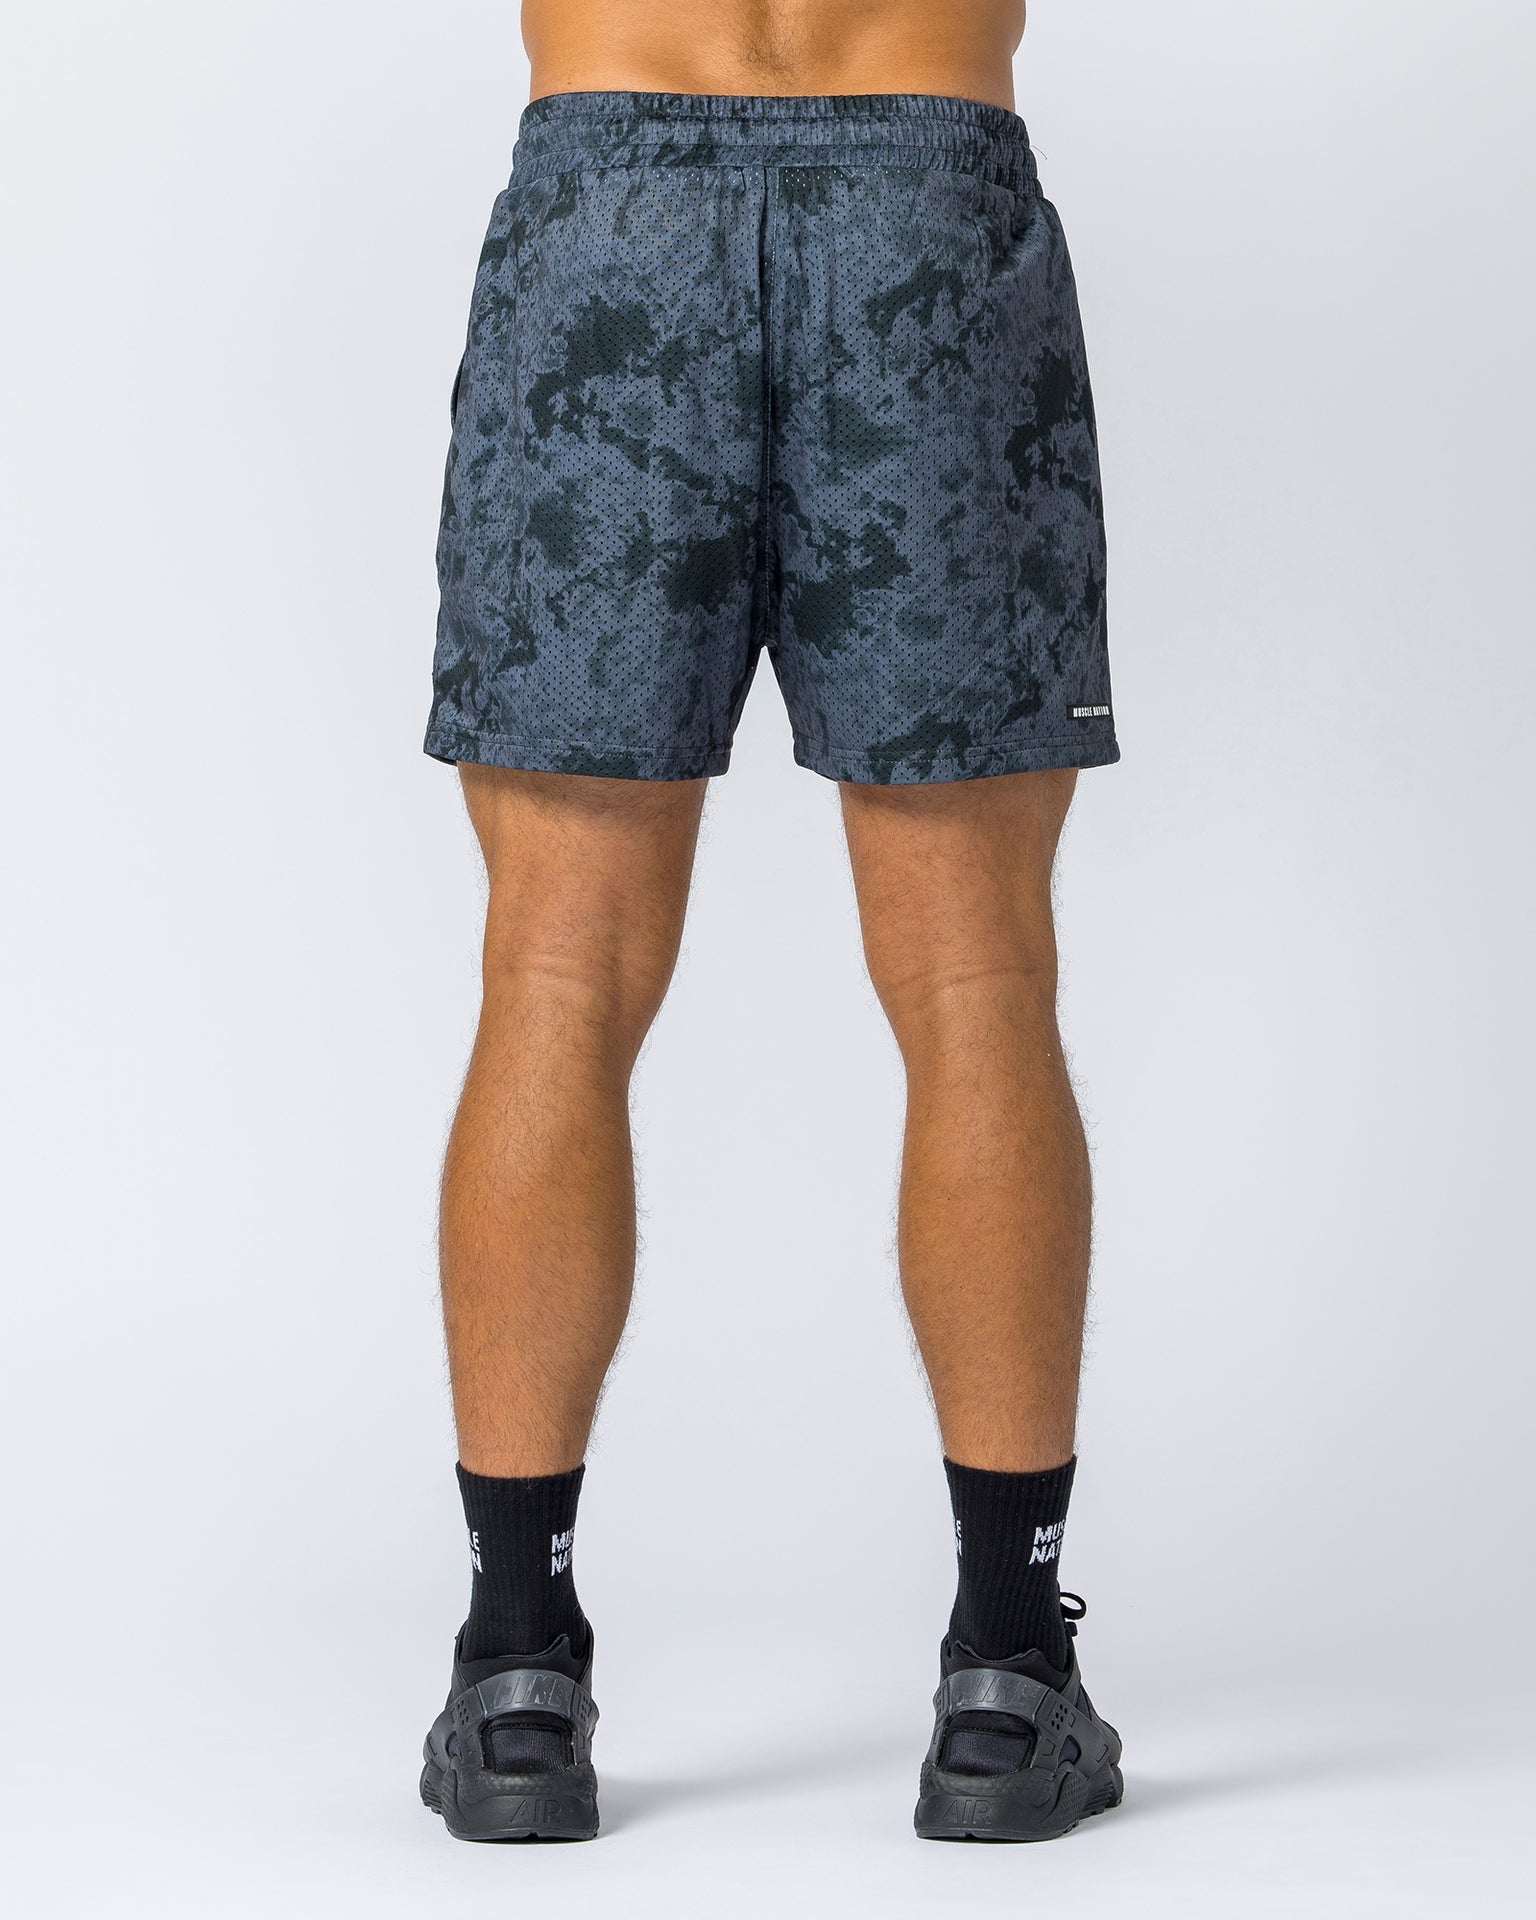 Muscle Nation Gym Shorts Copy of Retro Shorts - Dark Harbour